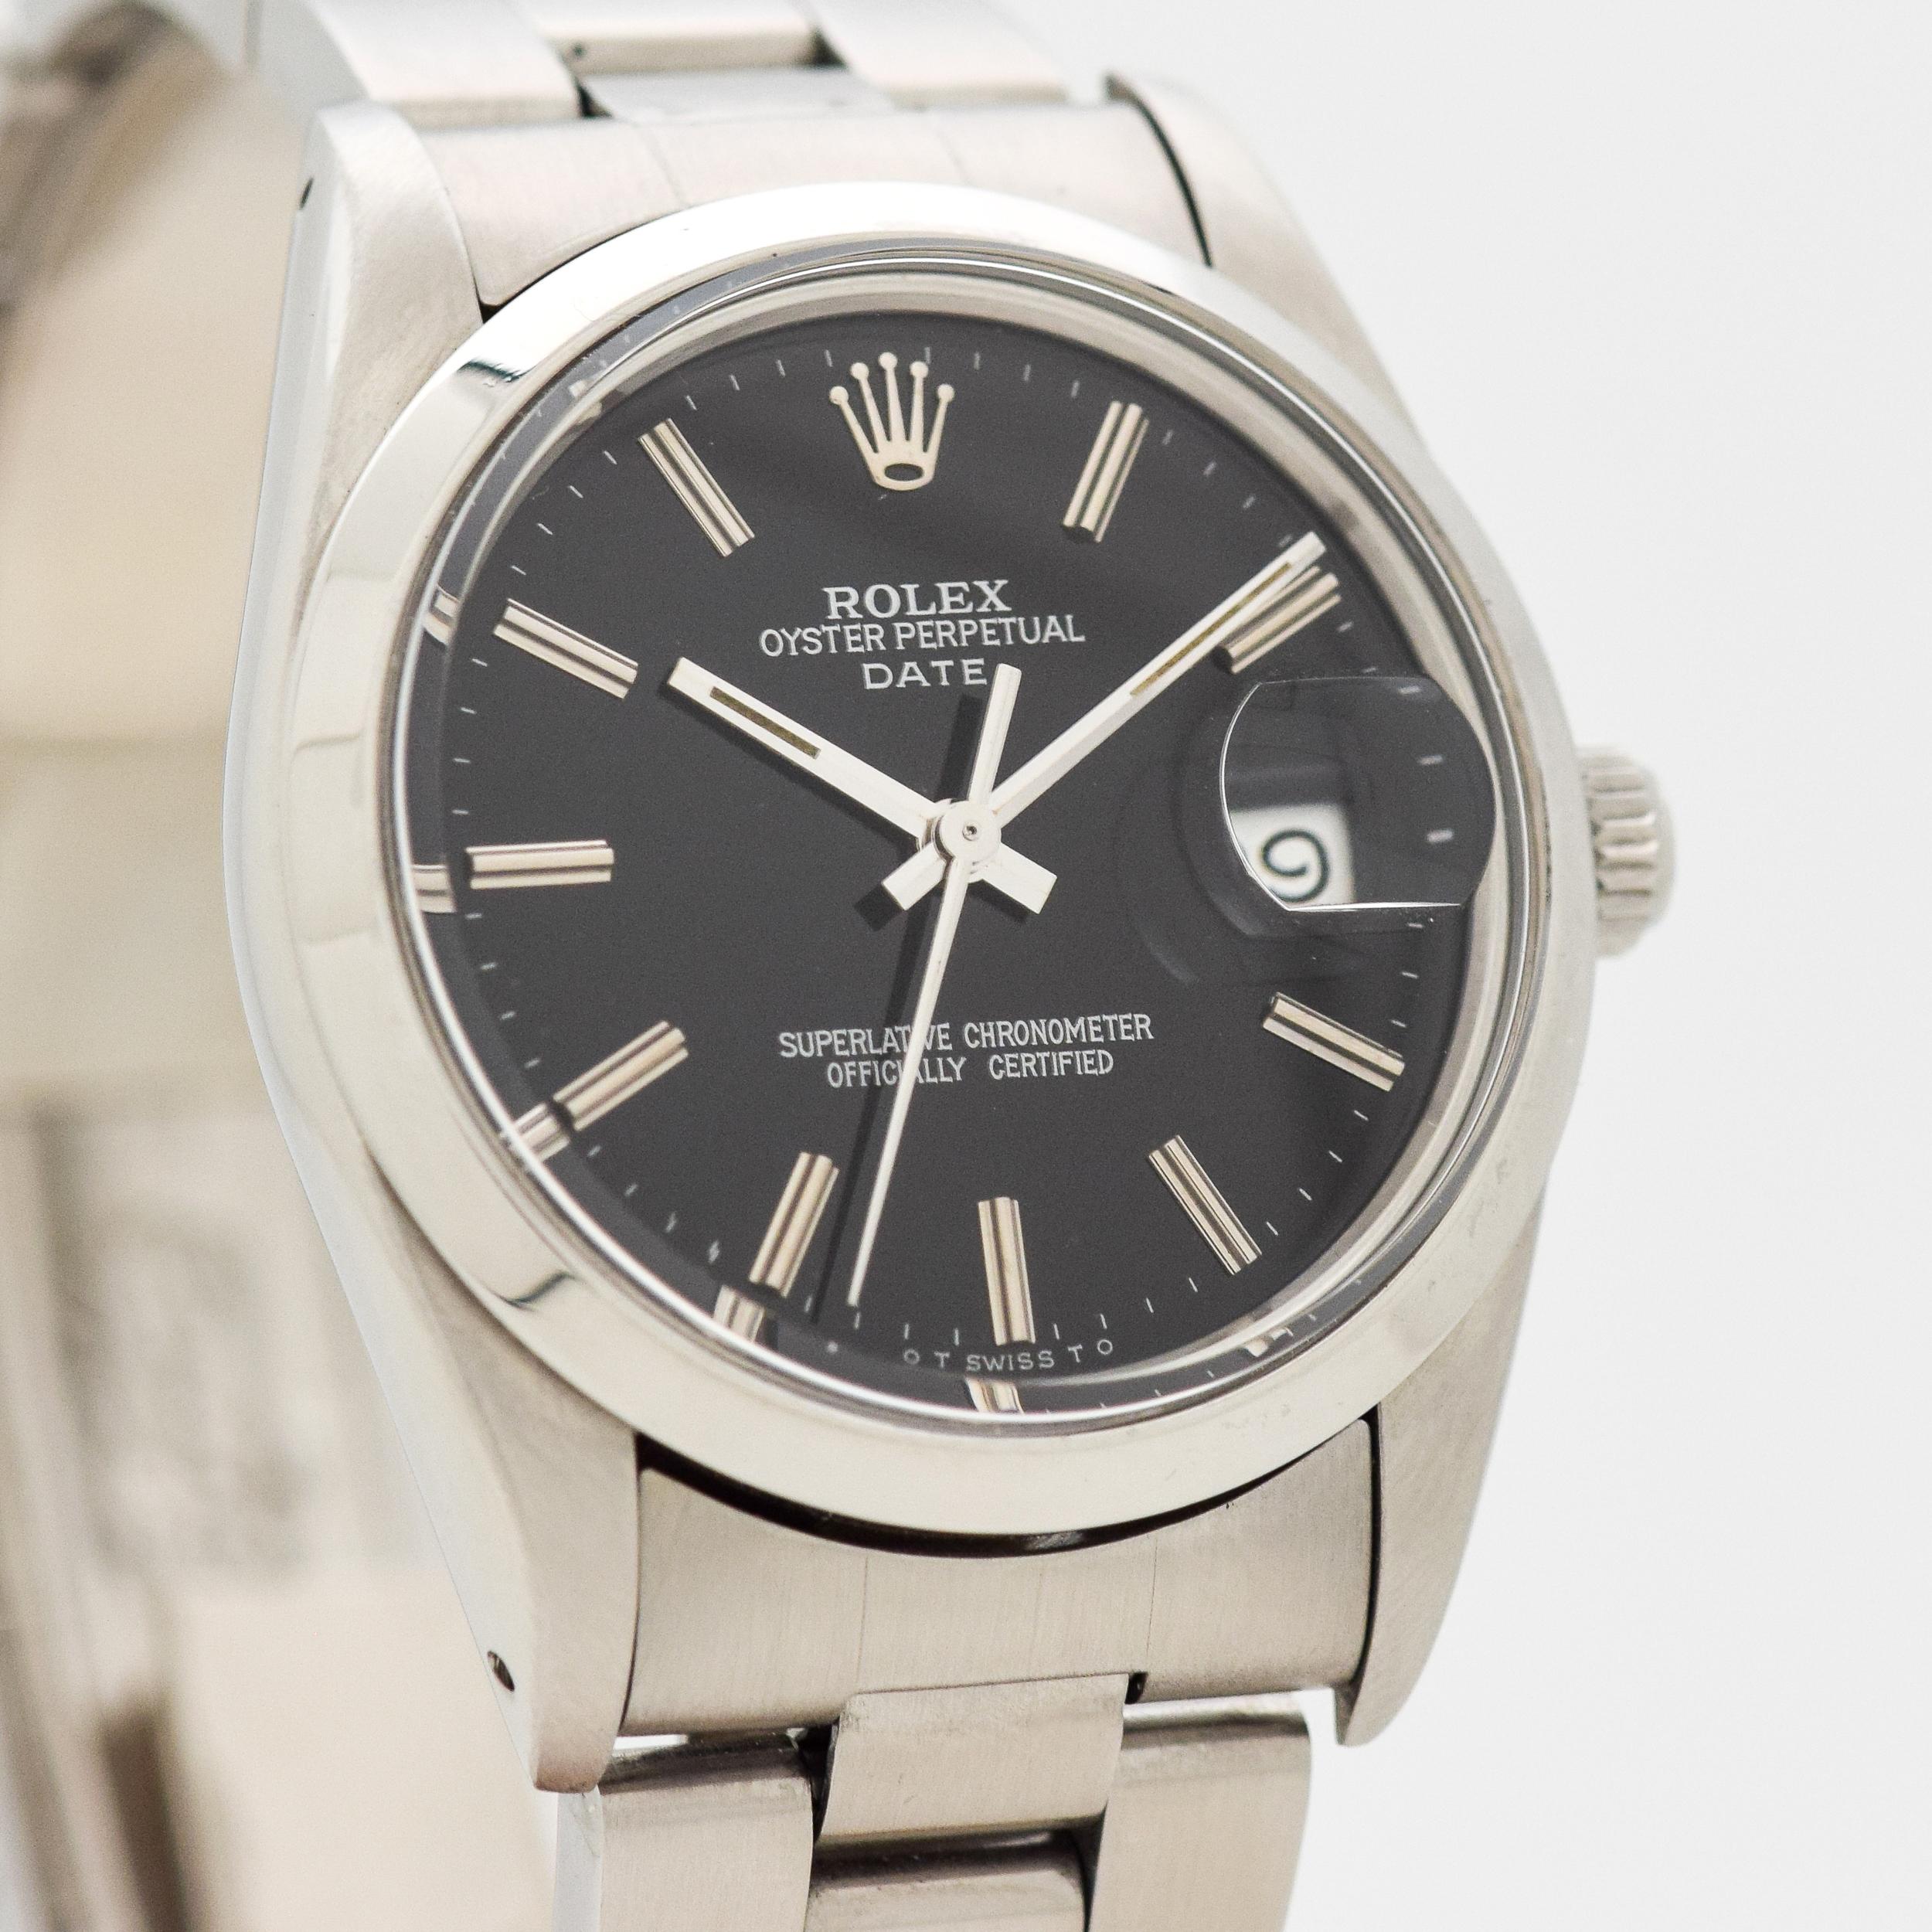 1984 Vintage Rolex Date Automatic Ref. 15000 Stainless Steel watch with Original Black Dial with Applied 14k White Gold Cylinder Stick/Bar/Baton Markers with Original Rolex Stainless Steel Oyster Bracelet. 35mm x 40mm lug to lug (1.38 in. x 1.57